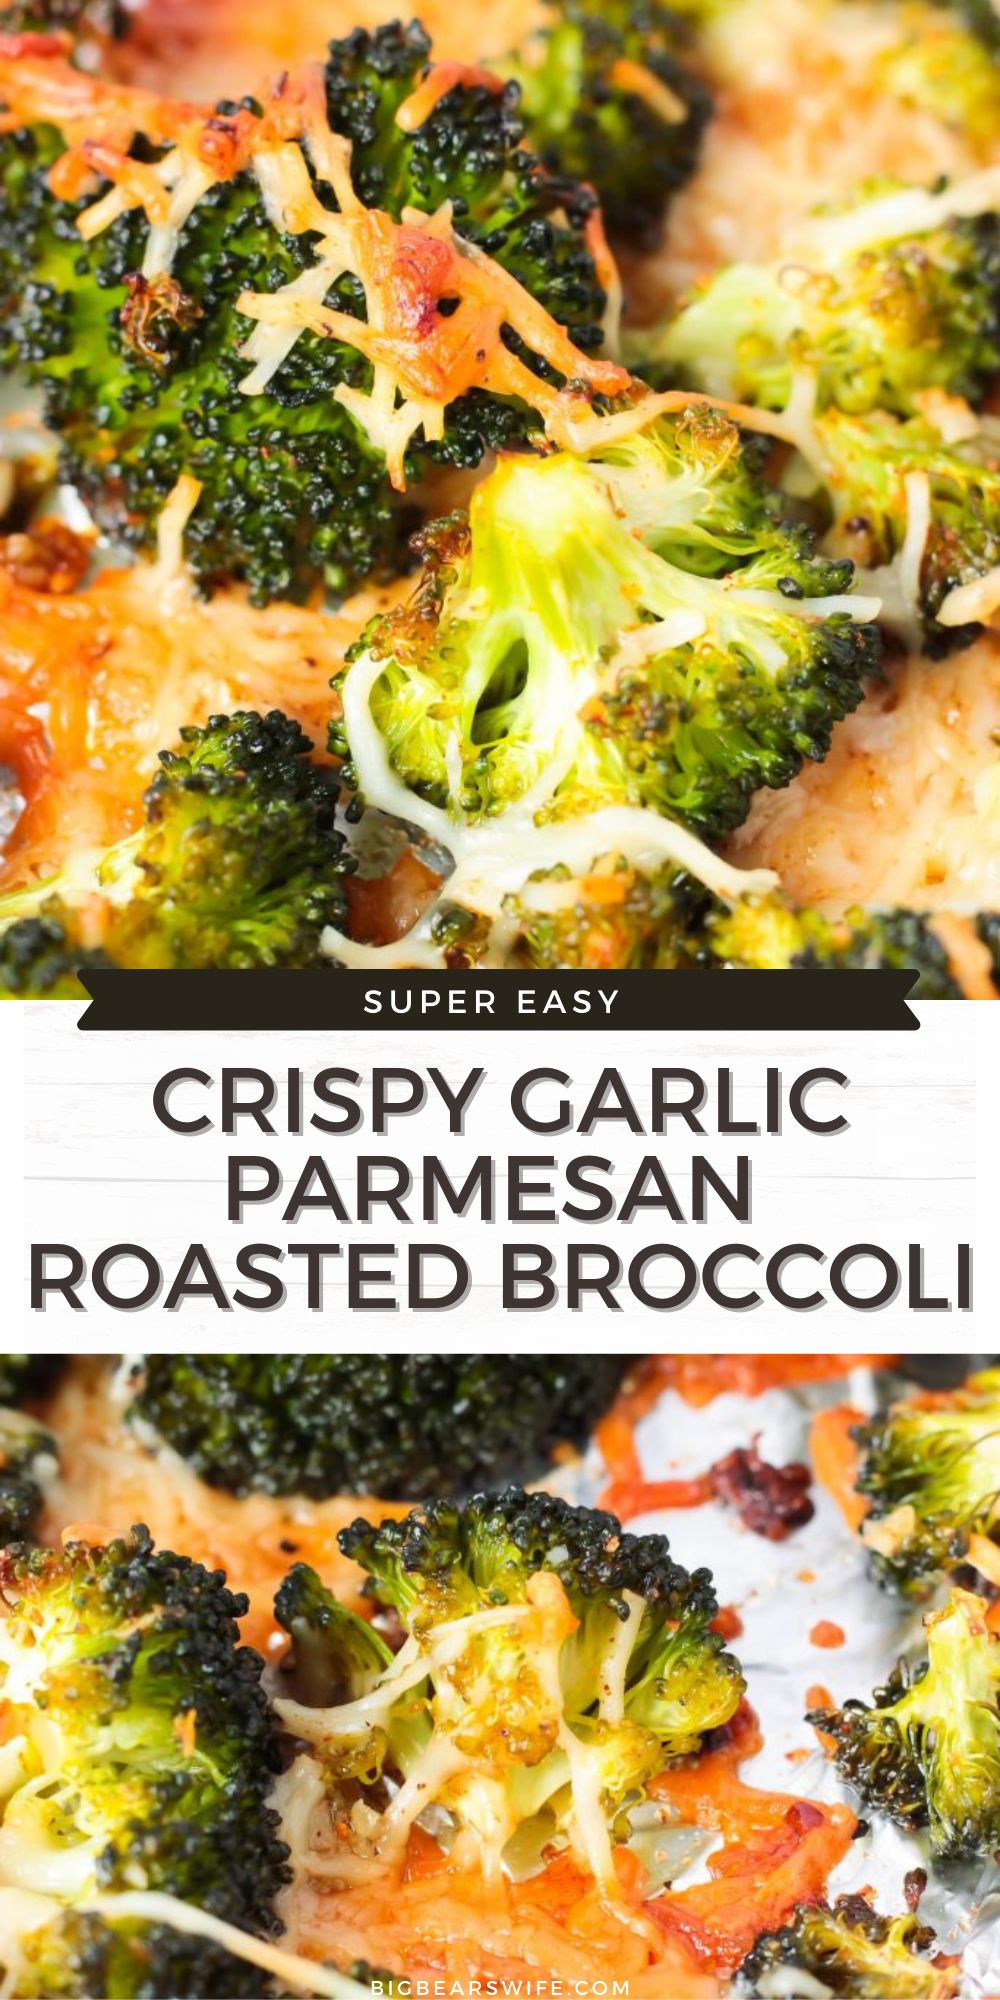 This Crispy Garlic Parmesan Roasted Broccoli is a perfectly tasty side dish that’s ready in less than 30 minutes! Just mix and roast for a super delicious side to serve with all sorts of entrees! 

 via @bigbearswife